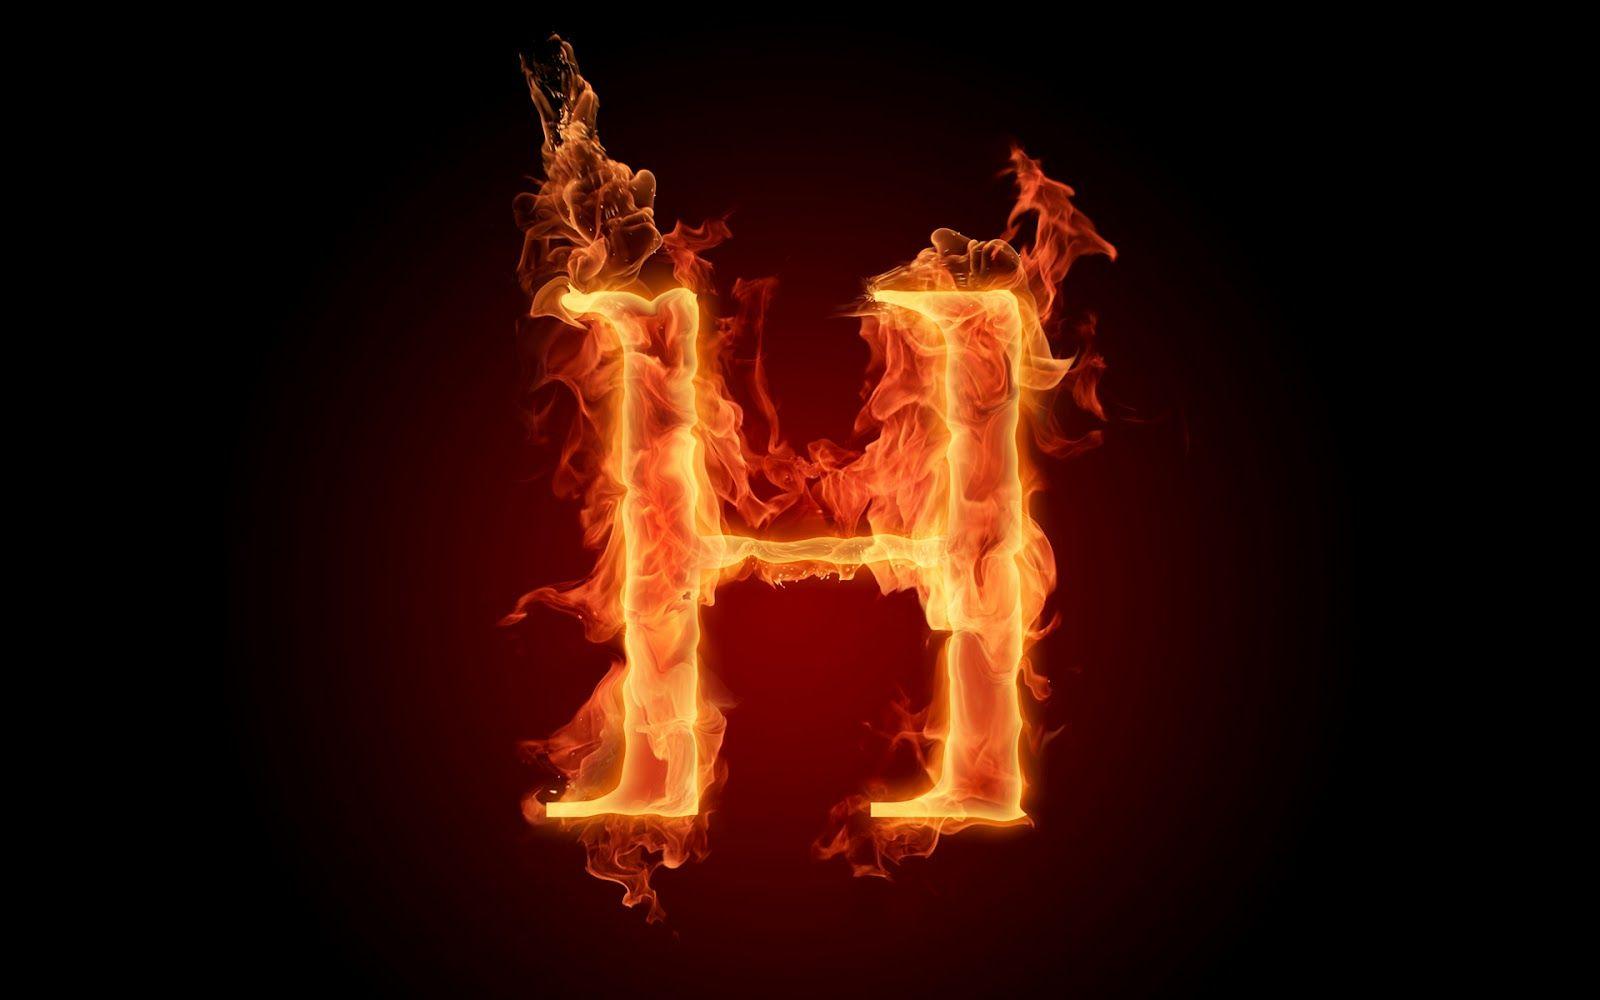 G K) Fiery English Alphabets Wallpaper Mobile 4 All